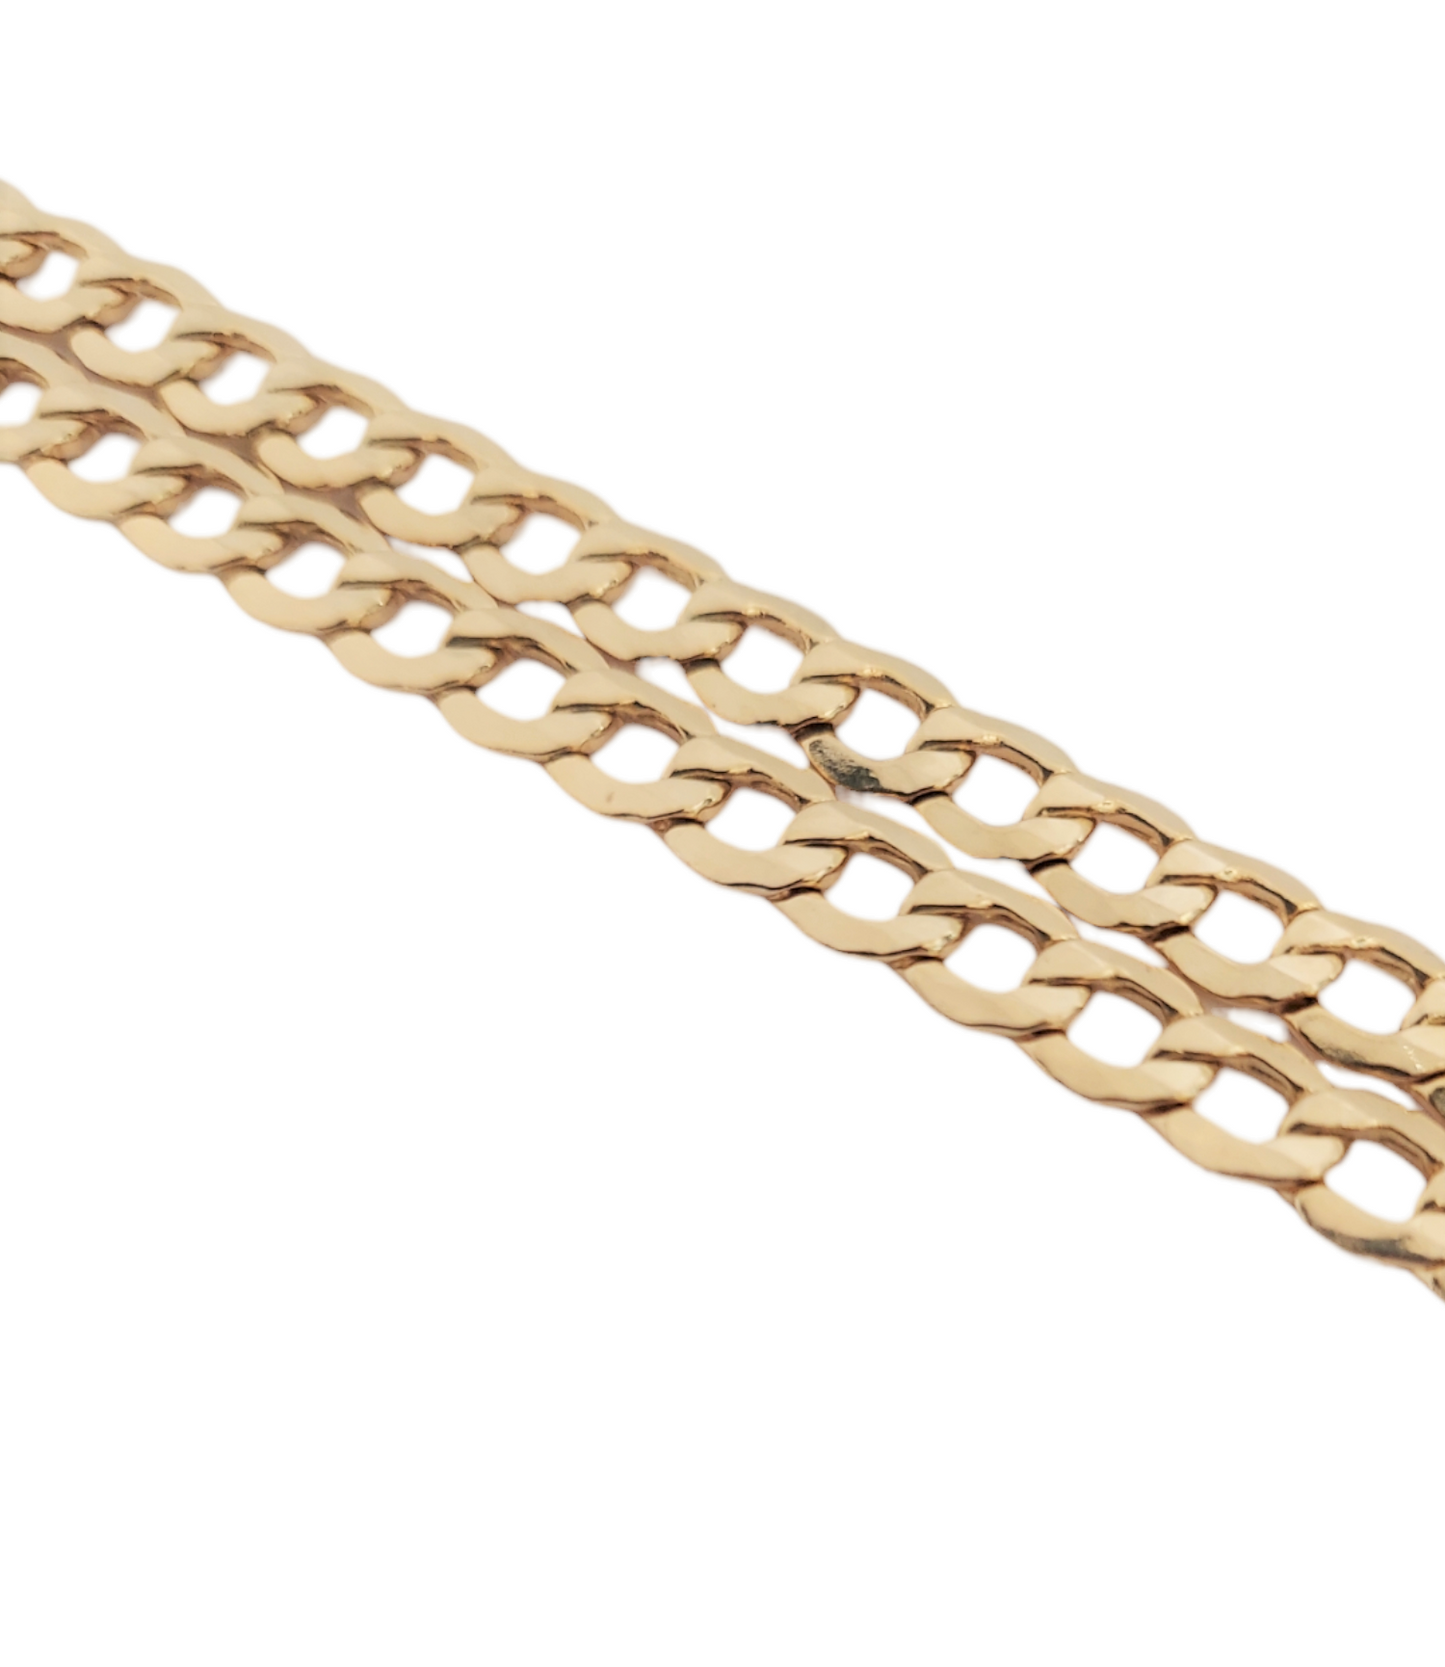 14k Yellow gold Unisex Curb Link necklace